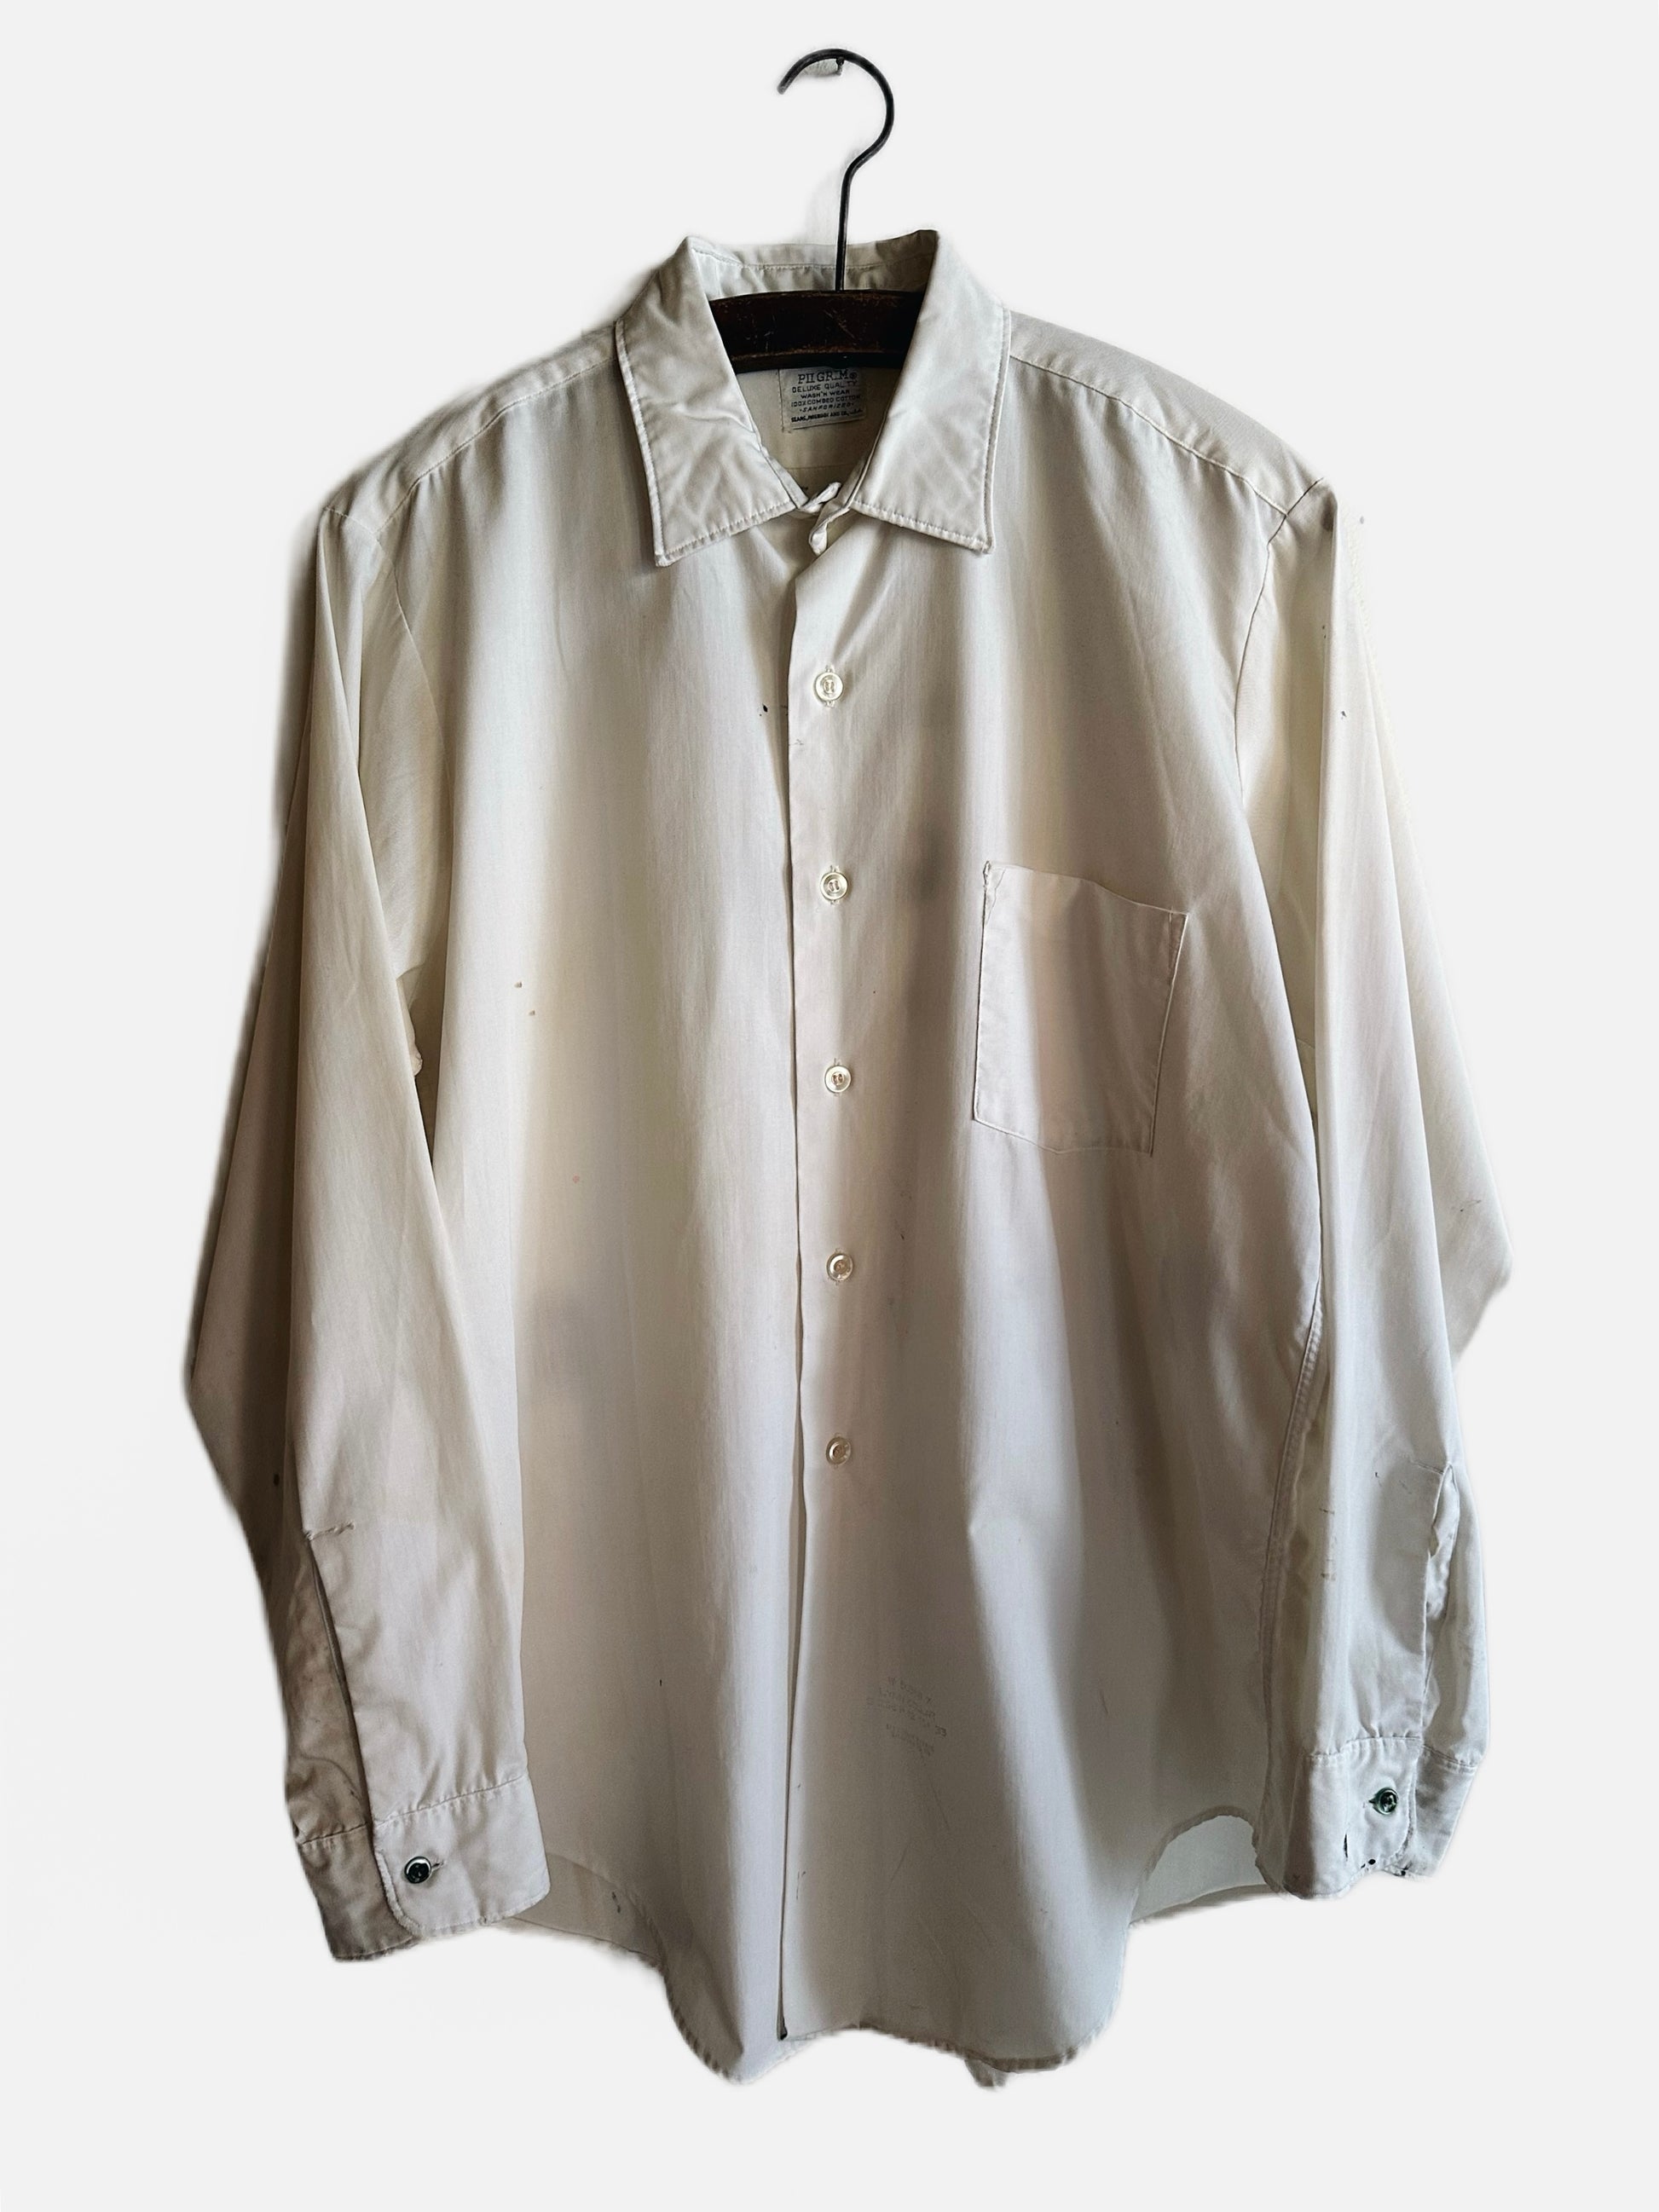 front view of shirt with single pocket and buttons for closure 